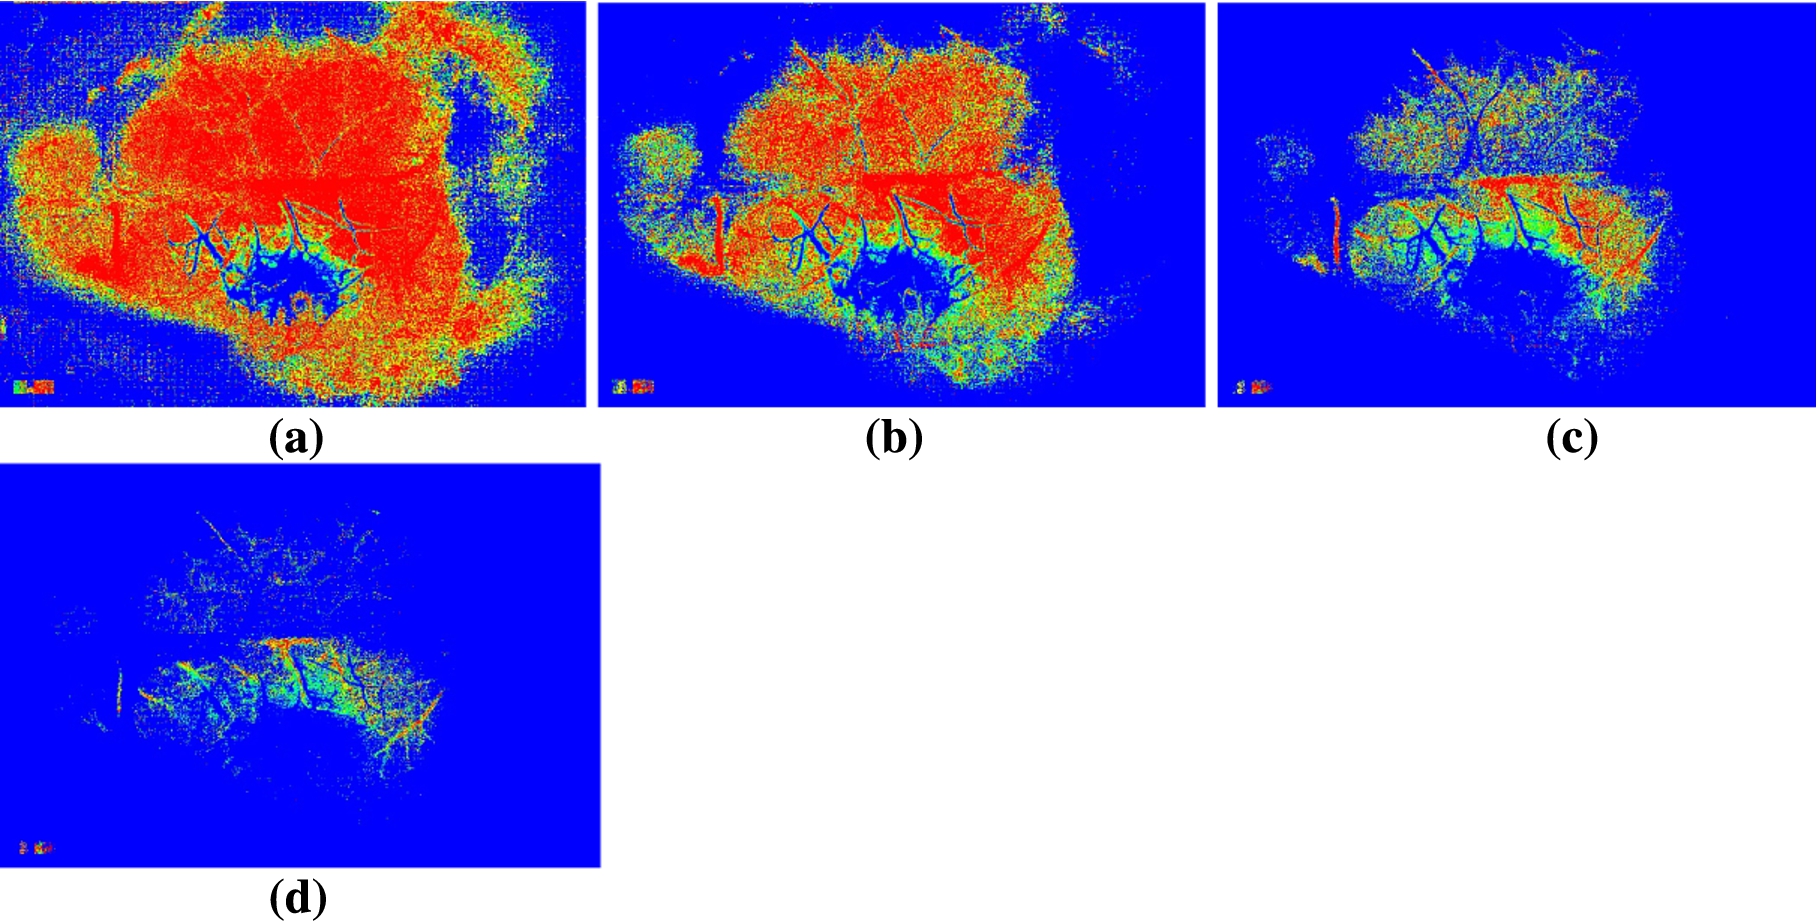 MHI images computed with different threshold values and with a buffer size of 8. The threshold value is equal to (a) 6; (b) 14; (c) 24; (d) 34.